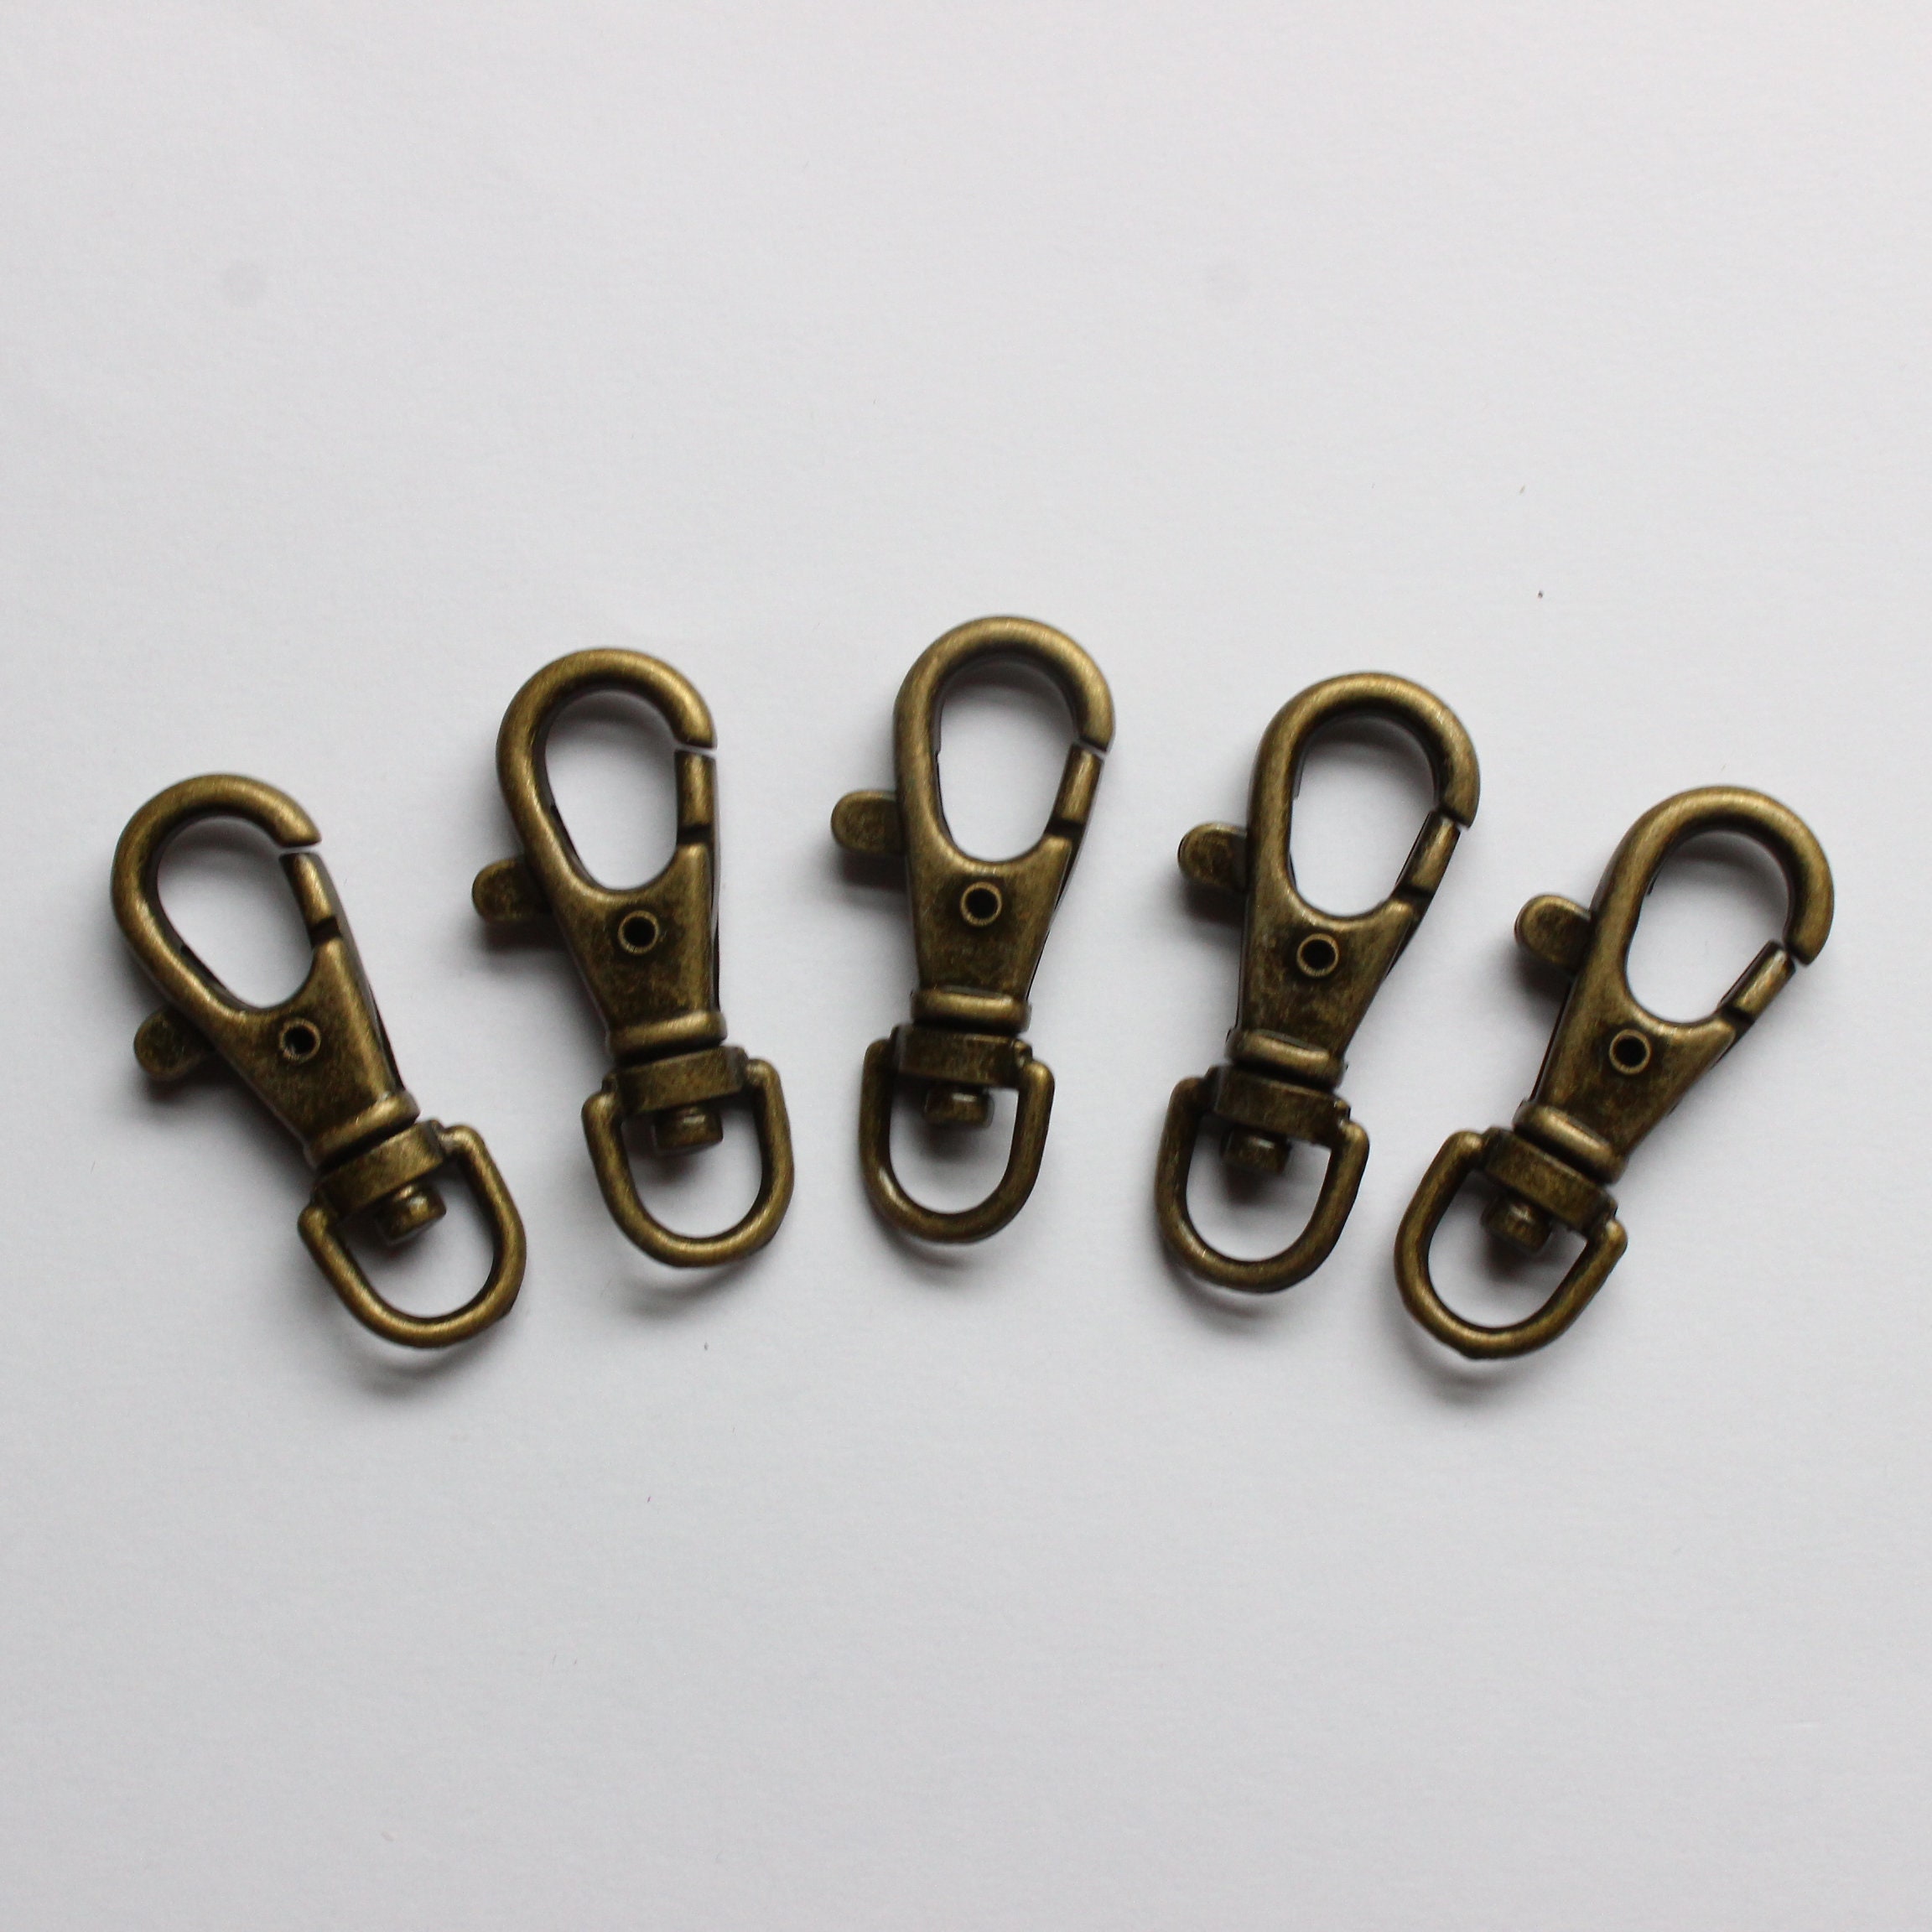 Mini Swivel Snap Hooks Antique Brass, 10mm Bag Strapping, Bag Chain, Bag  Strap Hooks Leather Bag Repairs, Bag Making Hardware, Alloy Hooks -   Canada